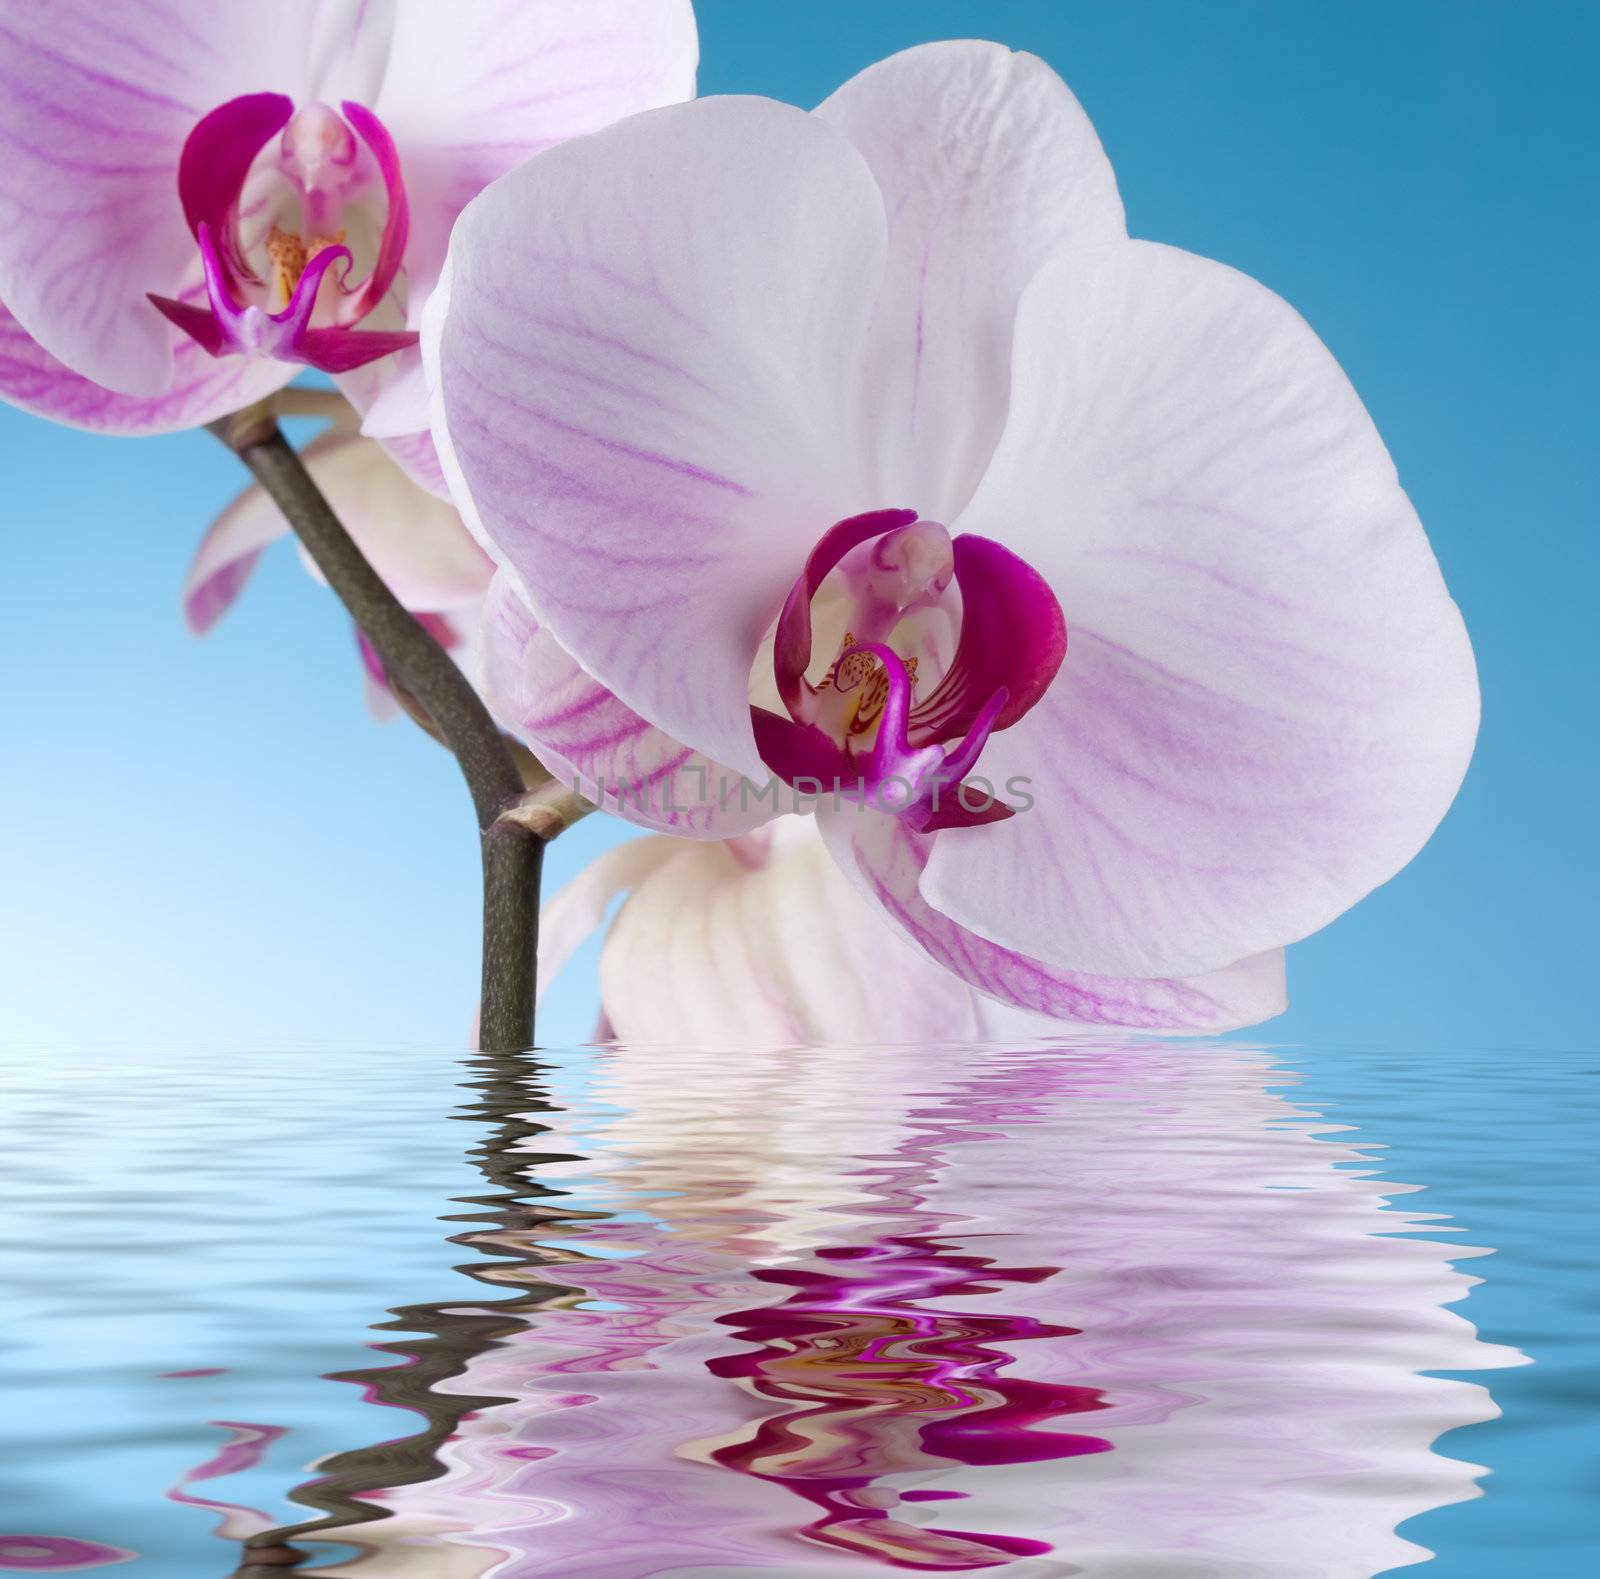 Orchid on Blue by rozhenyuk